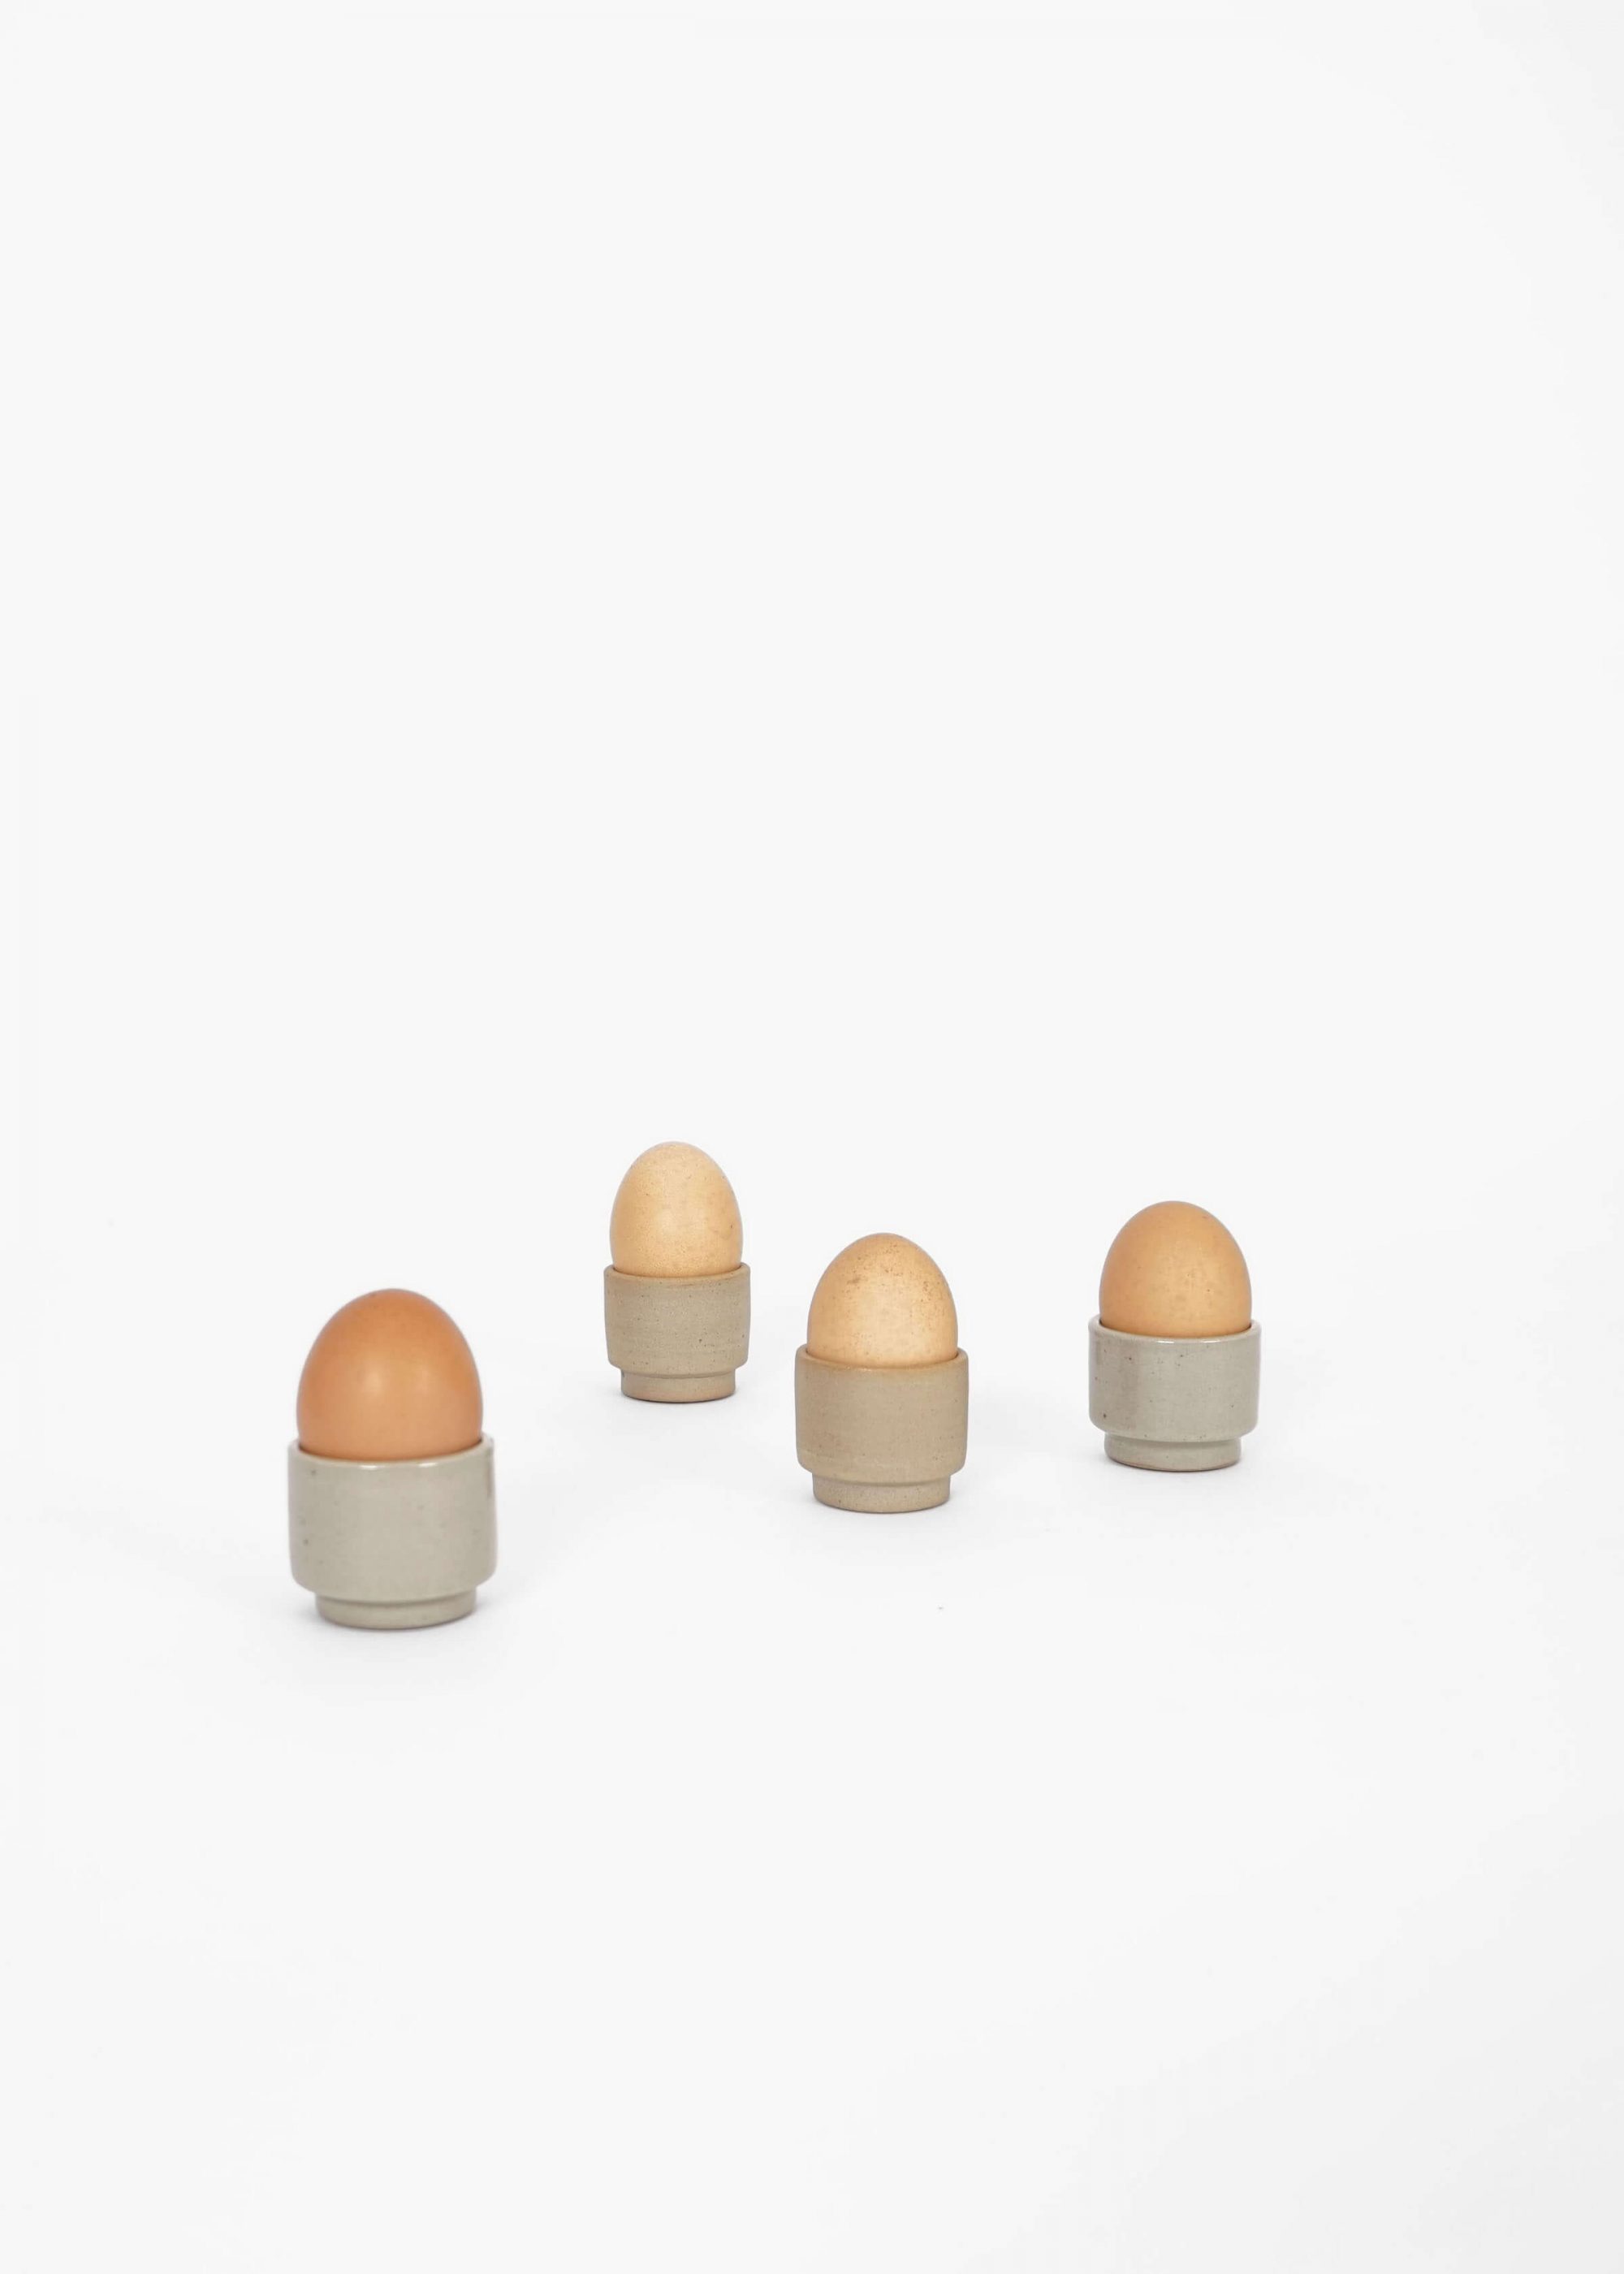 Product image for N° ICSF3 Beuys & Brutal Egg Cup Set